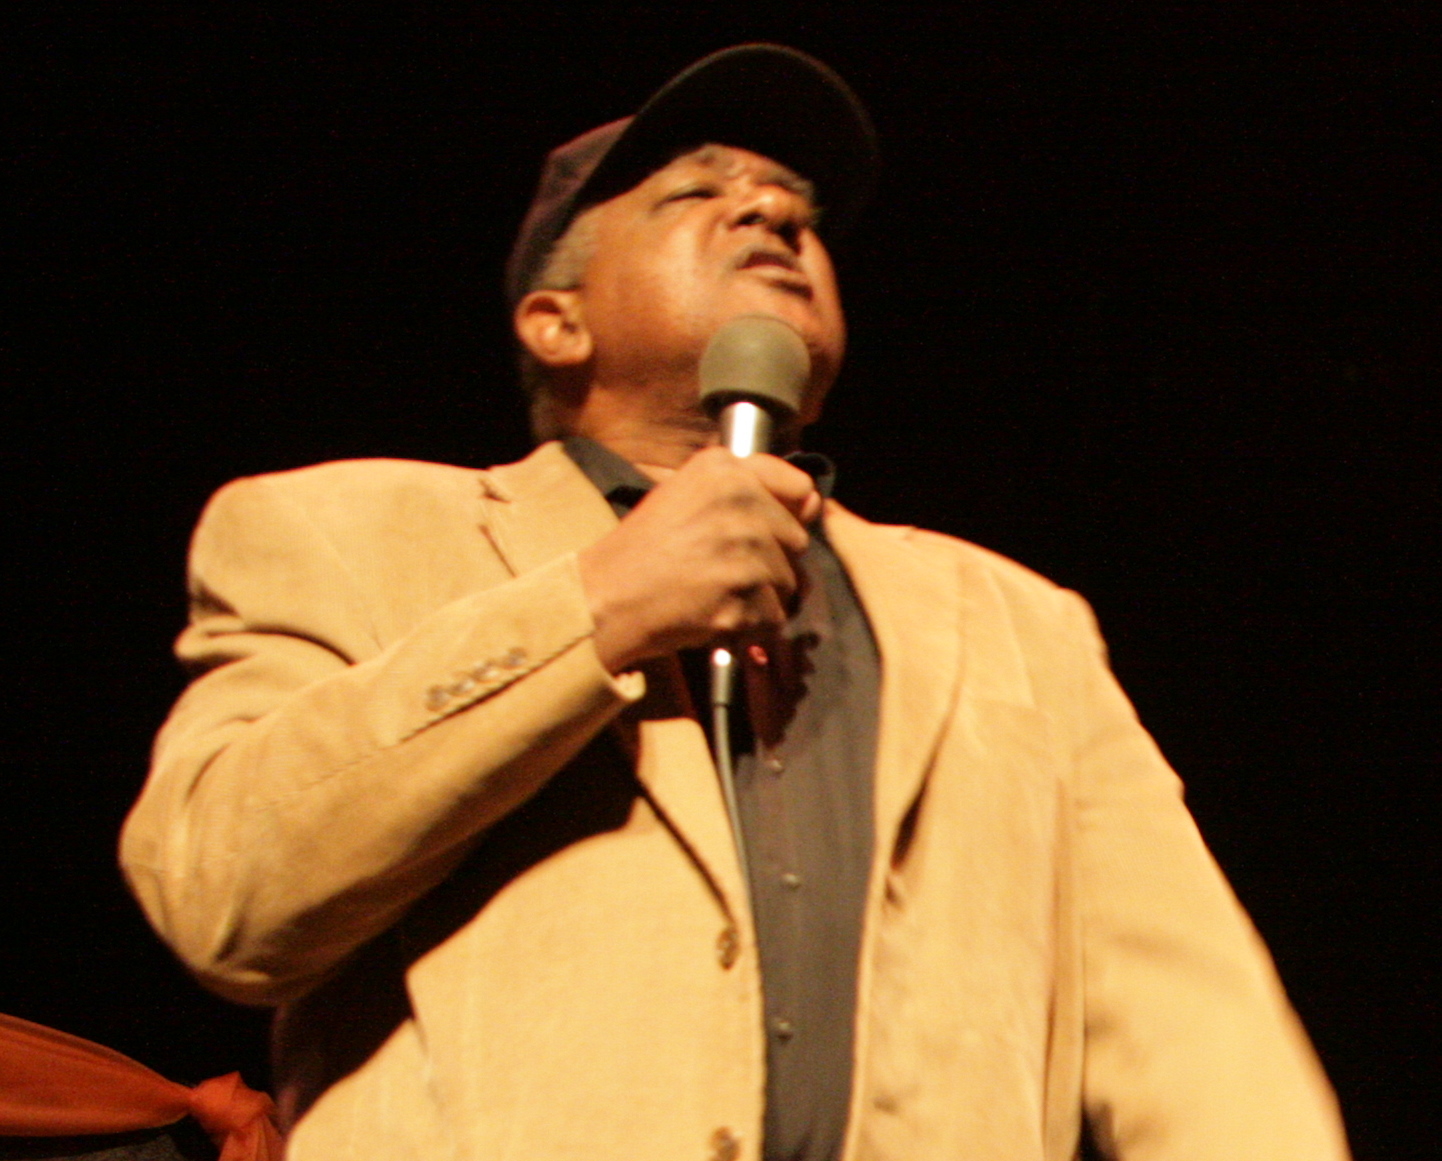 Black Panther Chairman Bobby Seale at 2009 Huey P. Newton Birthday Party